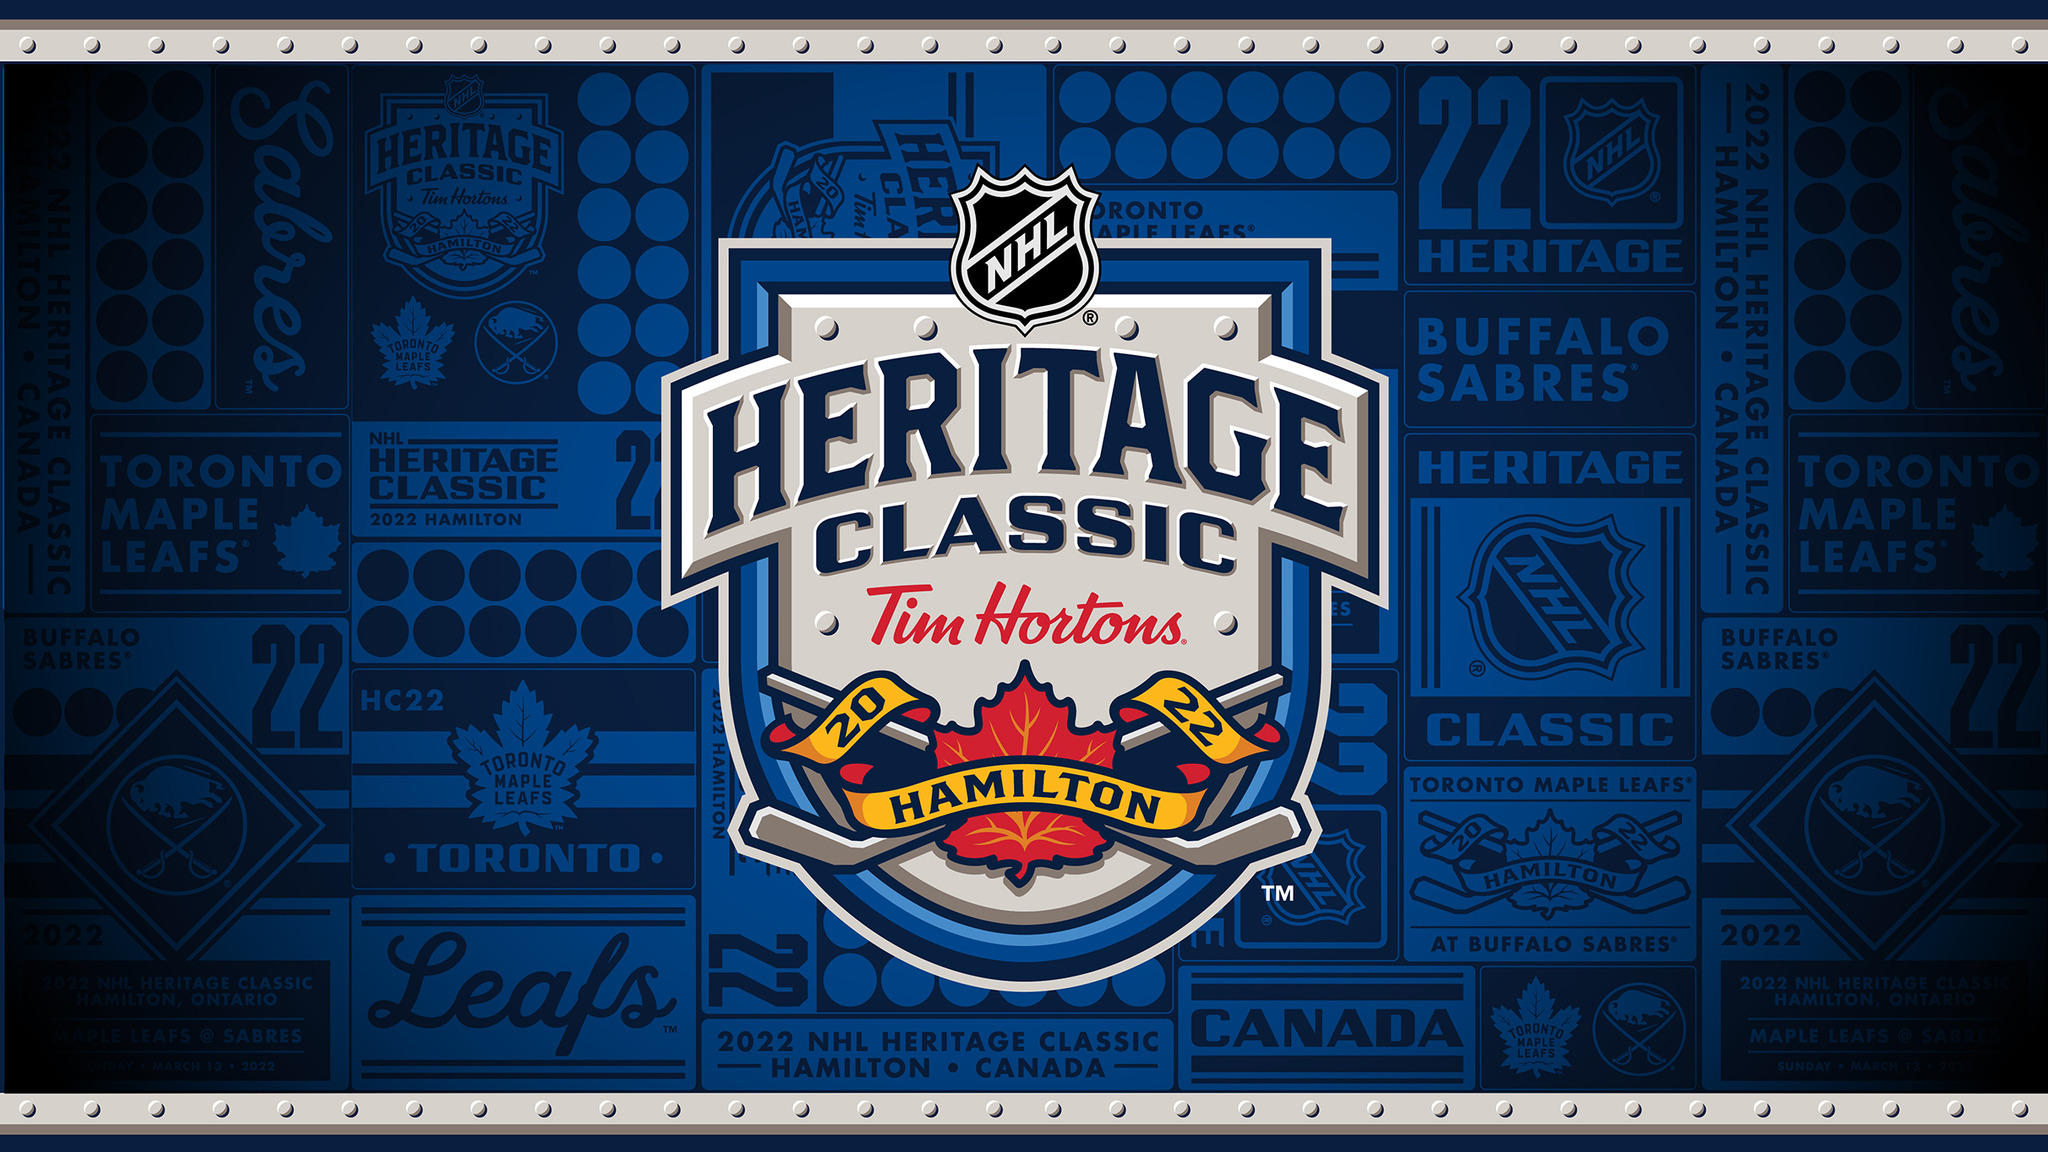 NHL Heritage Classic Tickets 20222023 NHL Tickets & Schedule